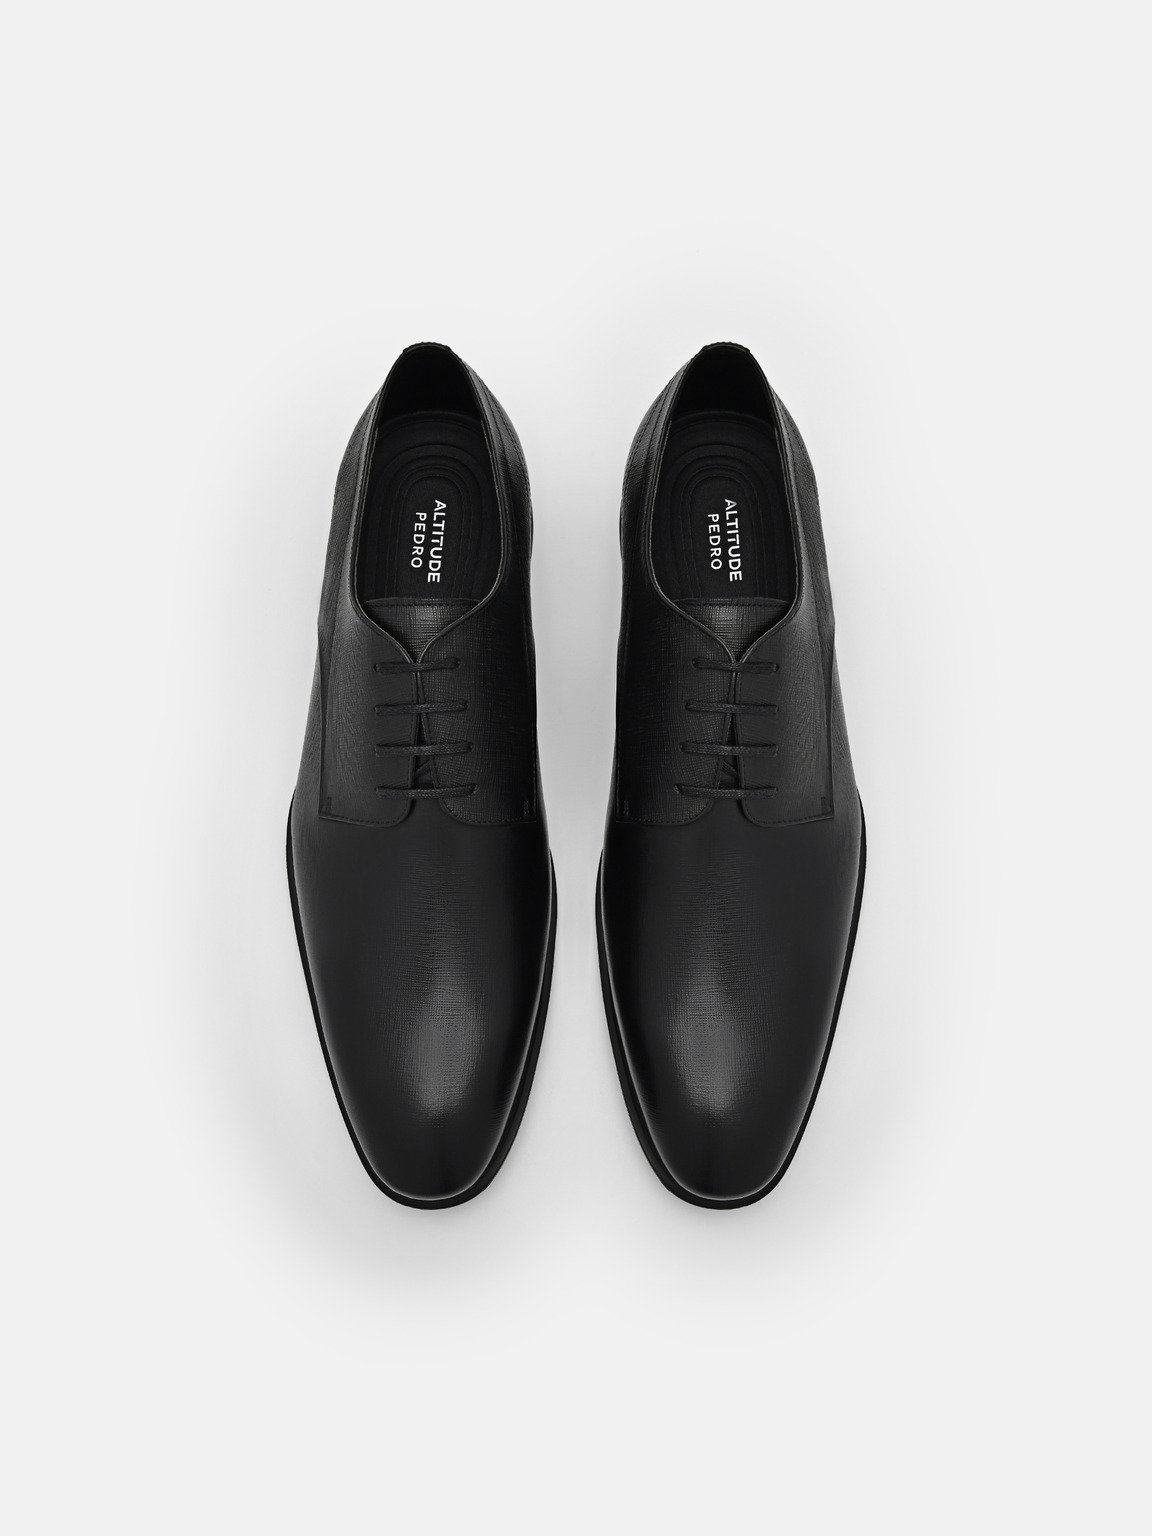 Altitude Lightweight Leather Derby Shoes, Black